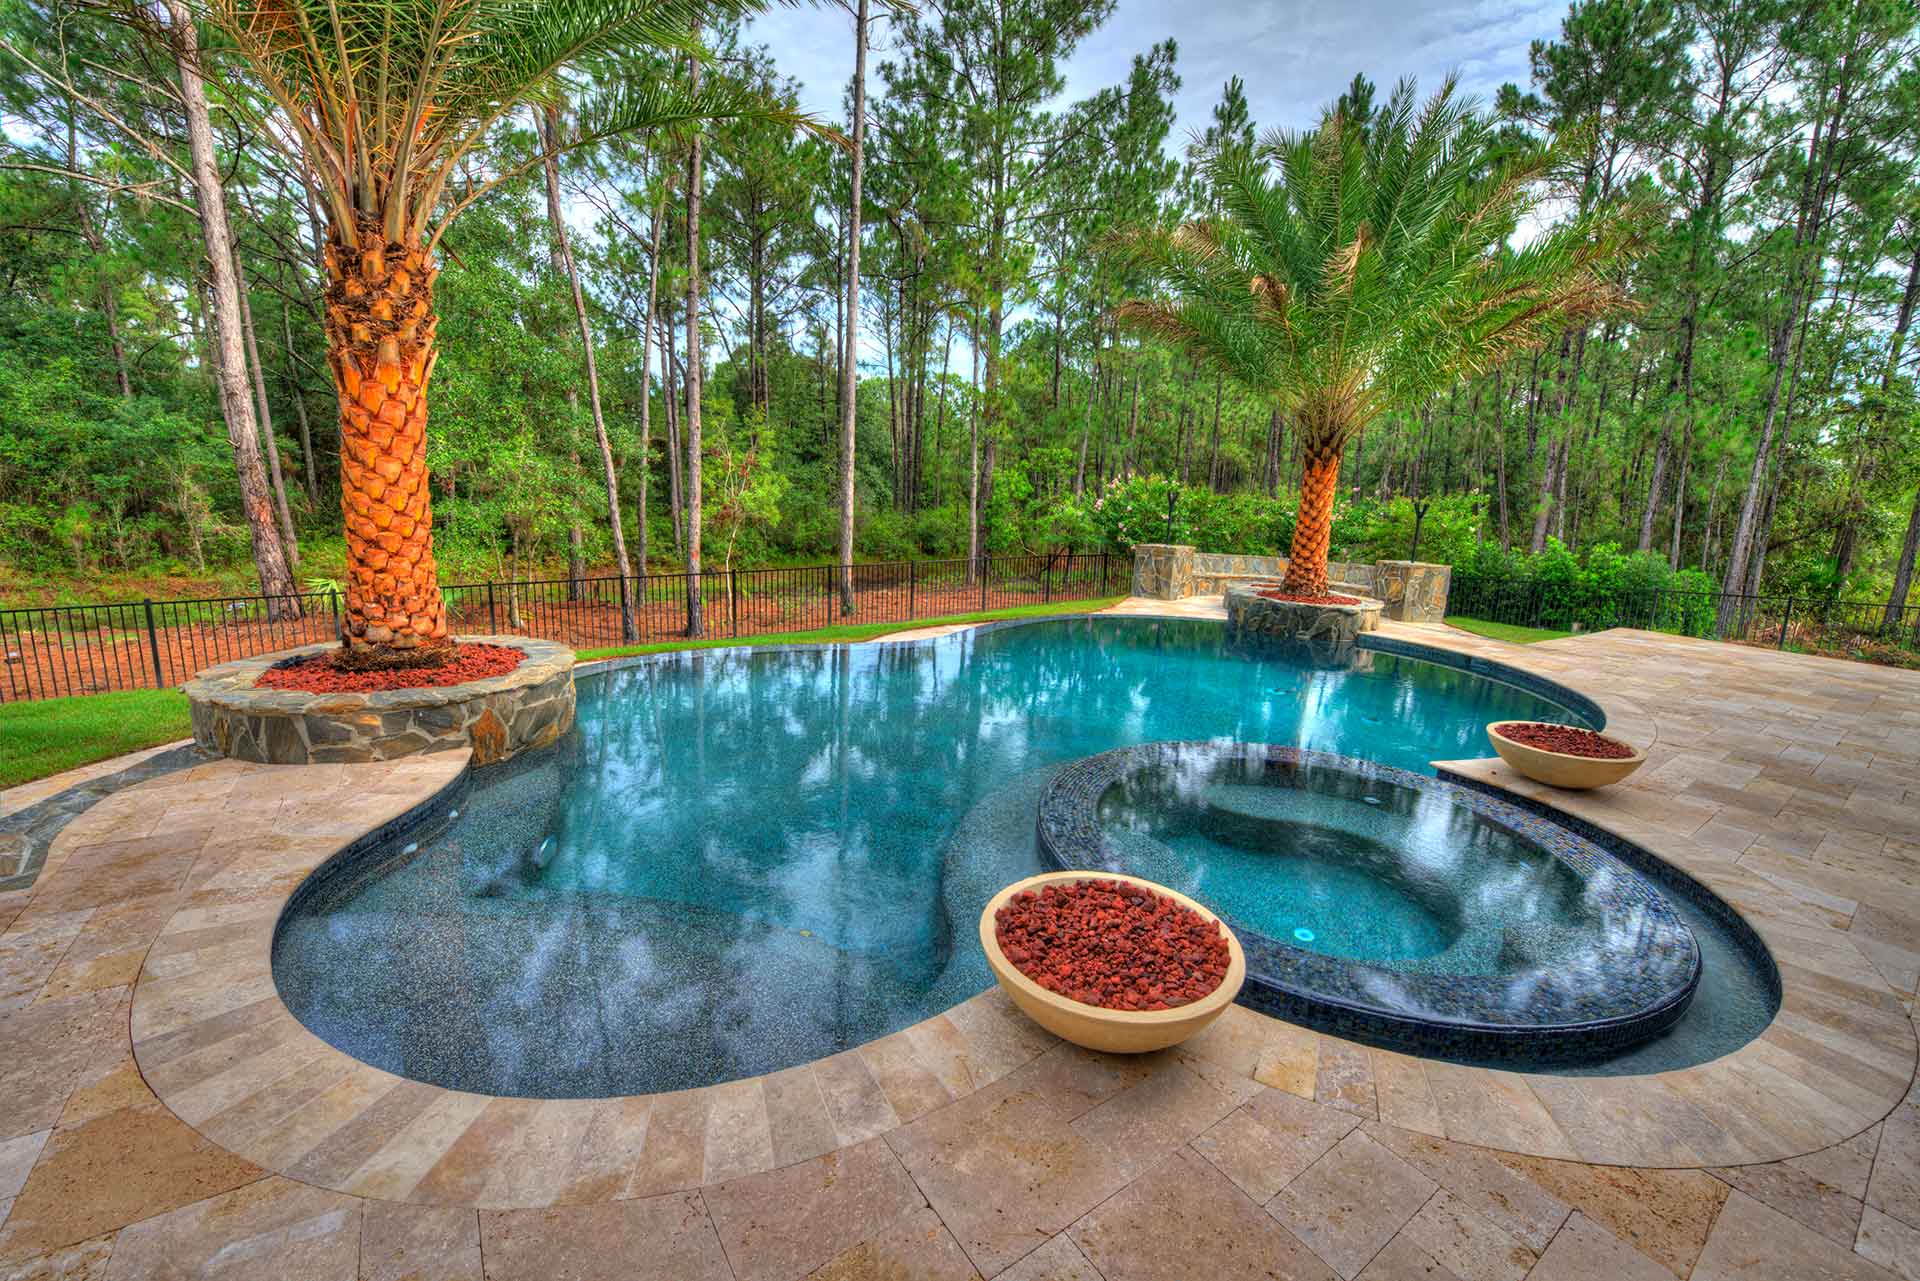 Creating Your Dream Backyard Swimming Pool Is More Affordable Than You Think